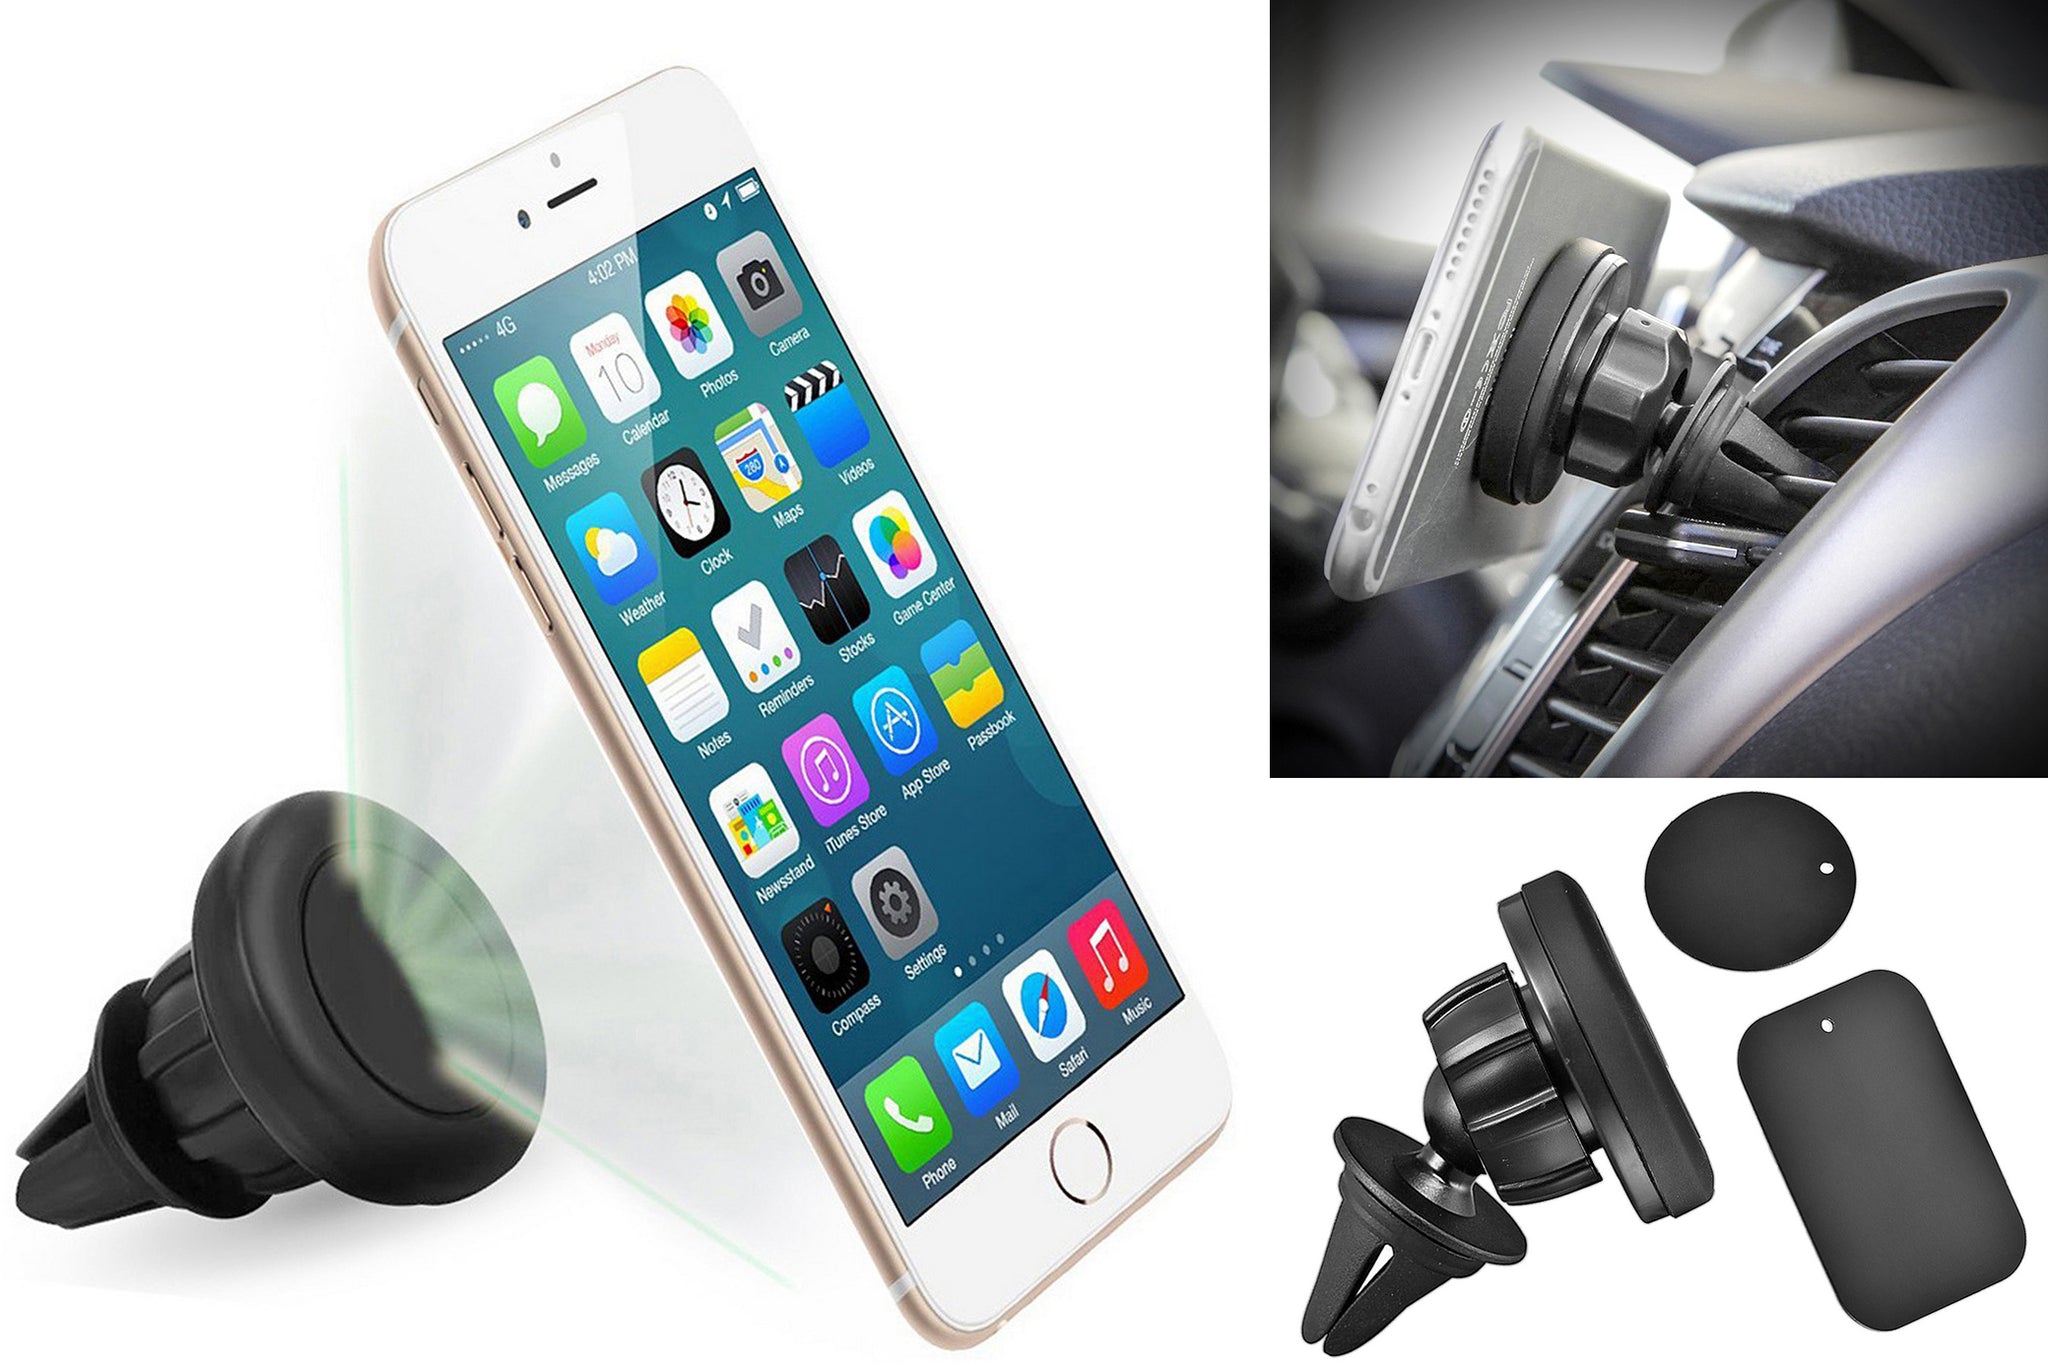 Universal Magnetic in Car Mobile Phone Holder Air Vent Phone Mount